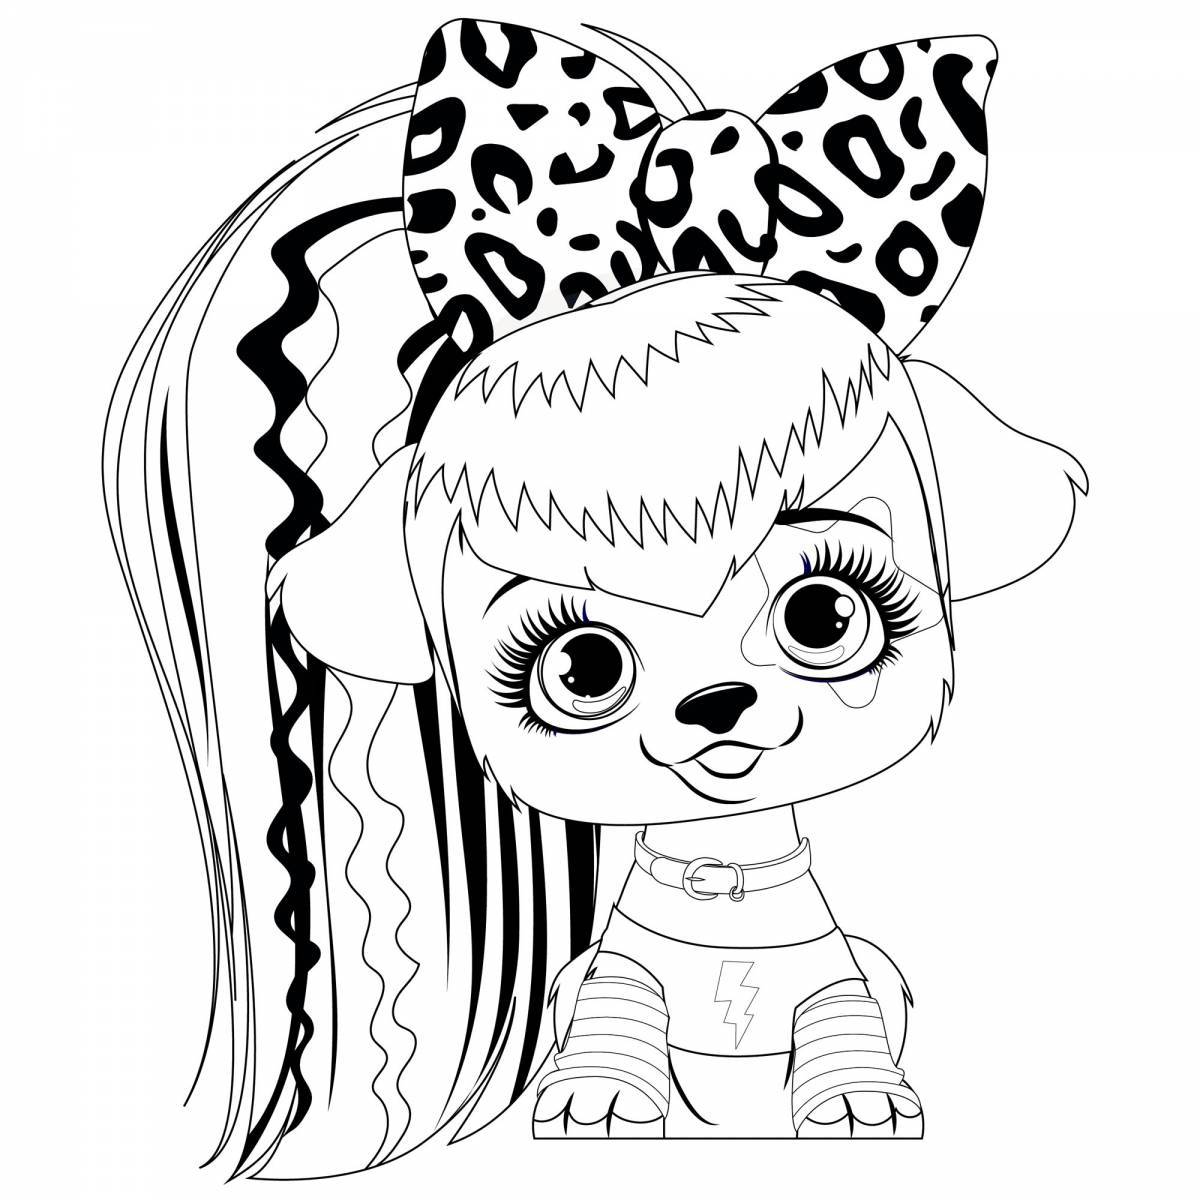 Vip pets live coloring page